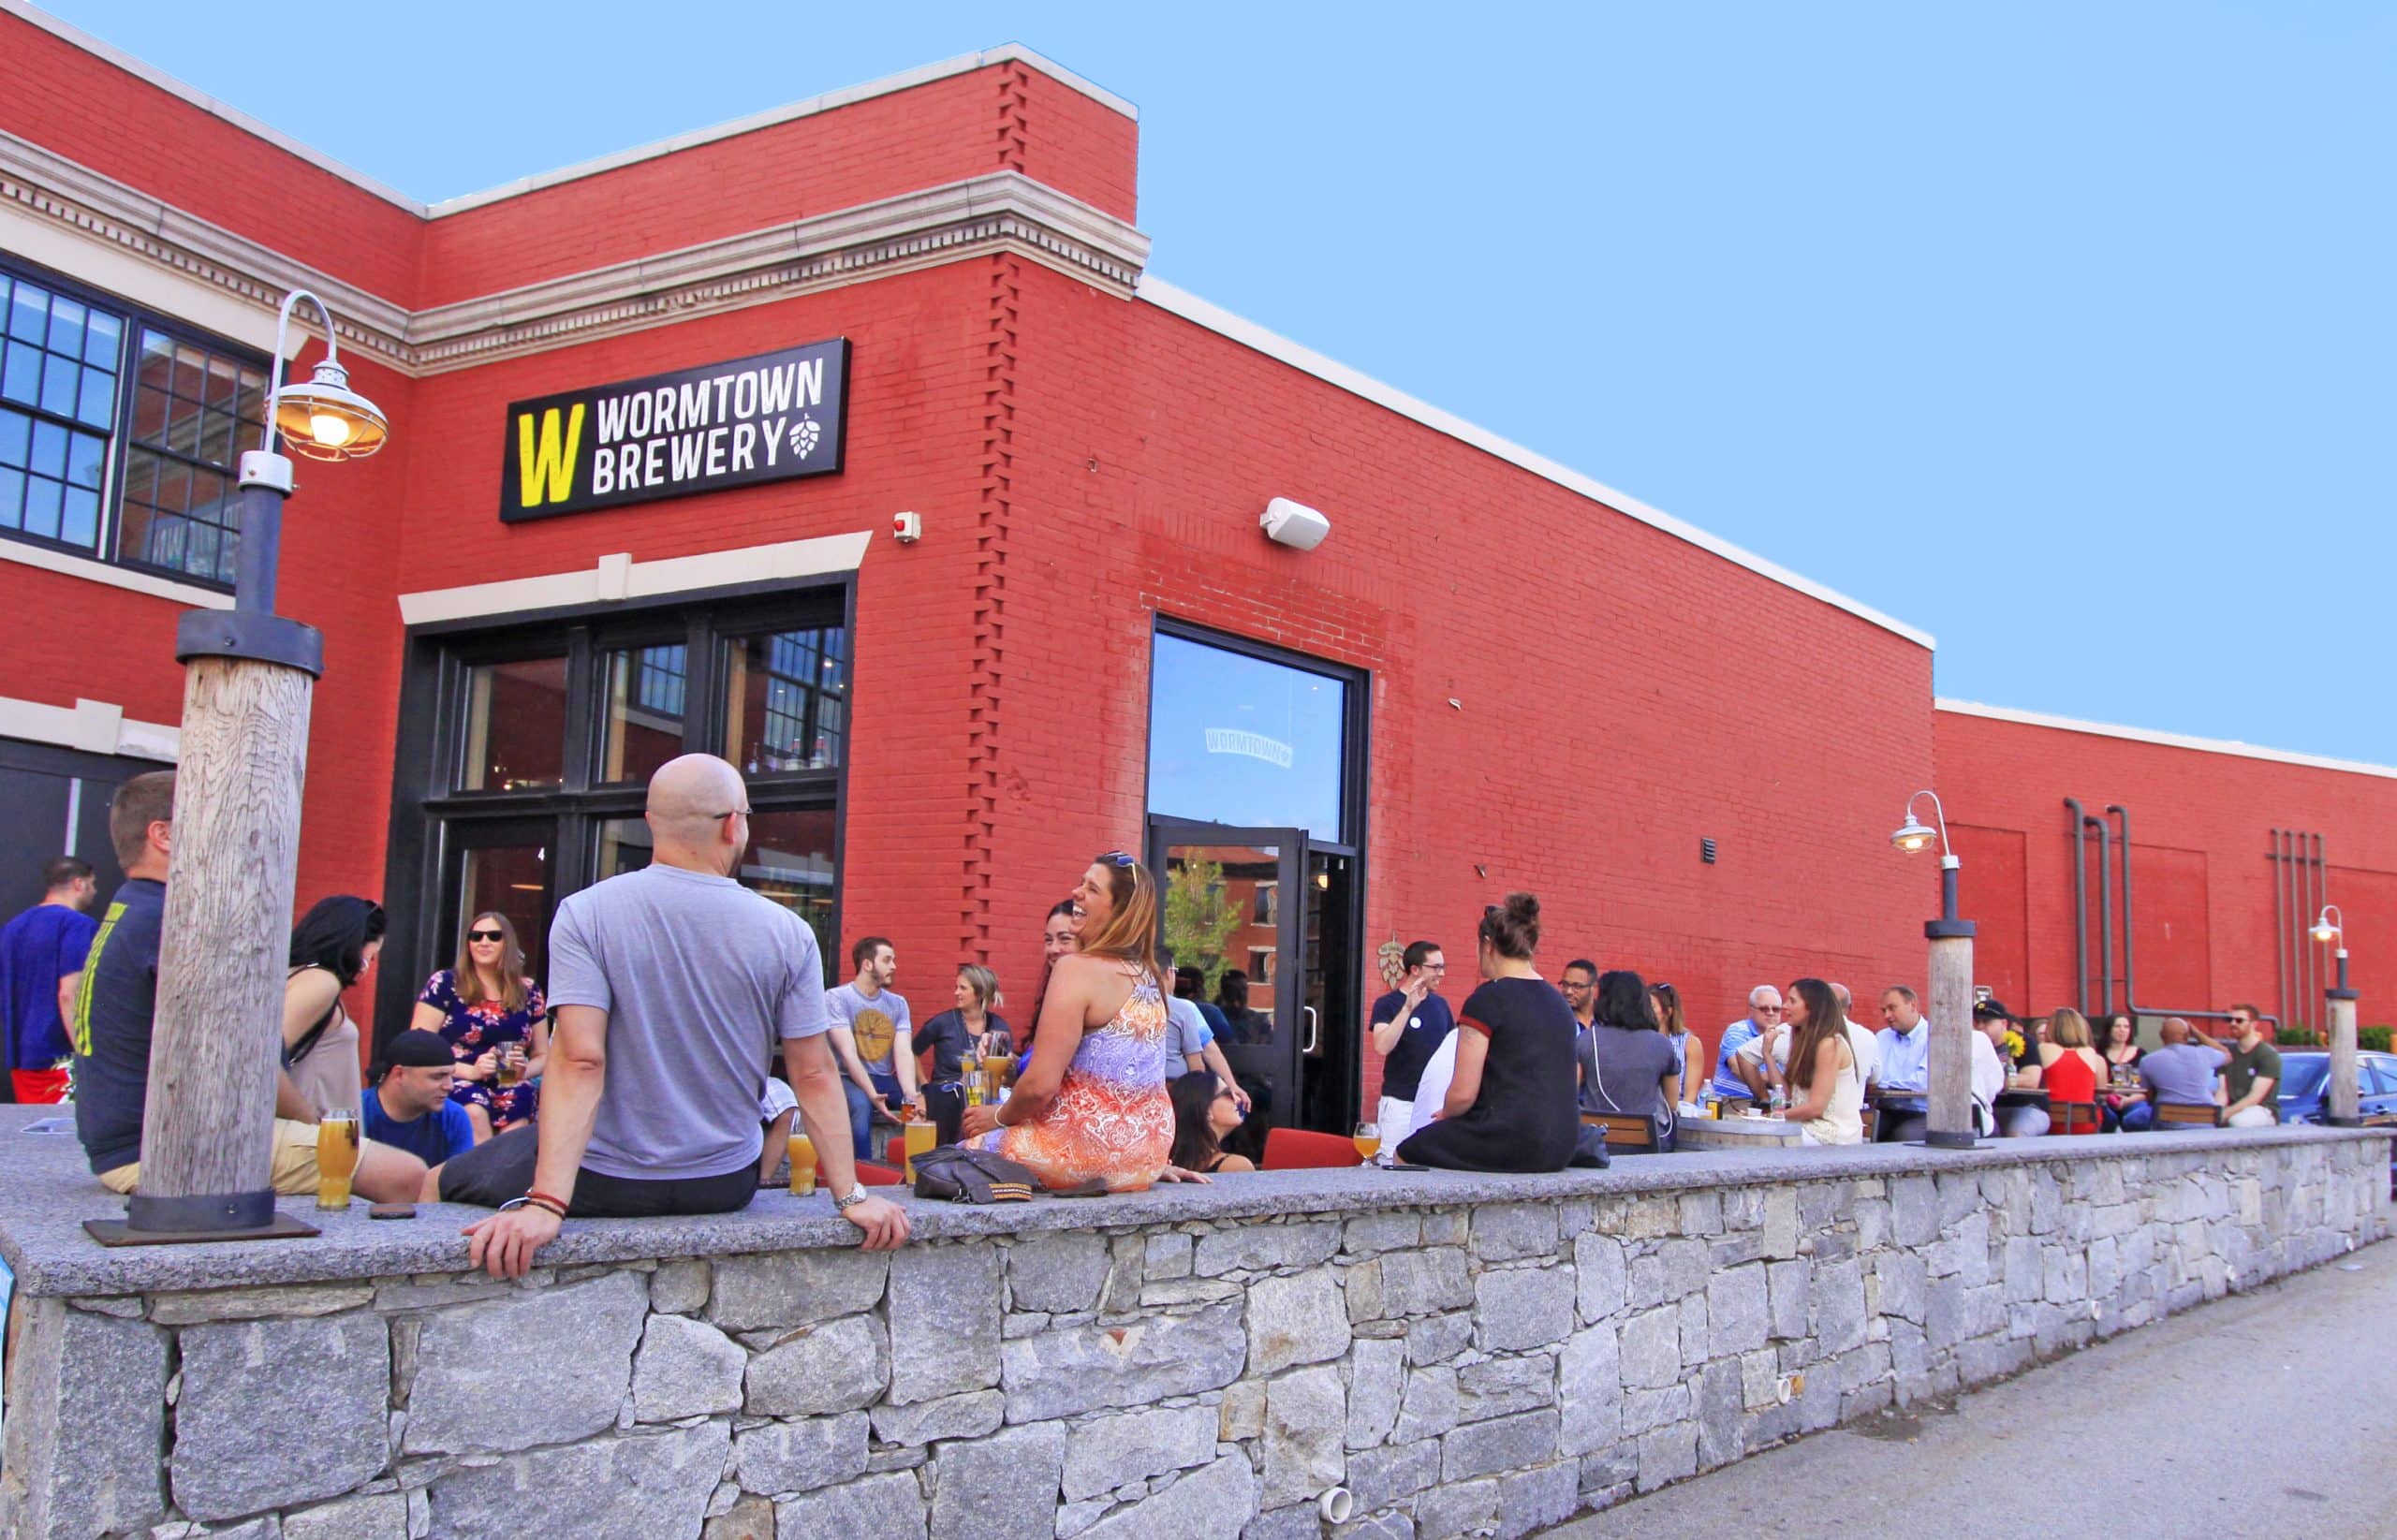 Patio_Full_WormtownBrewery